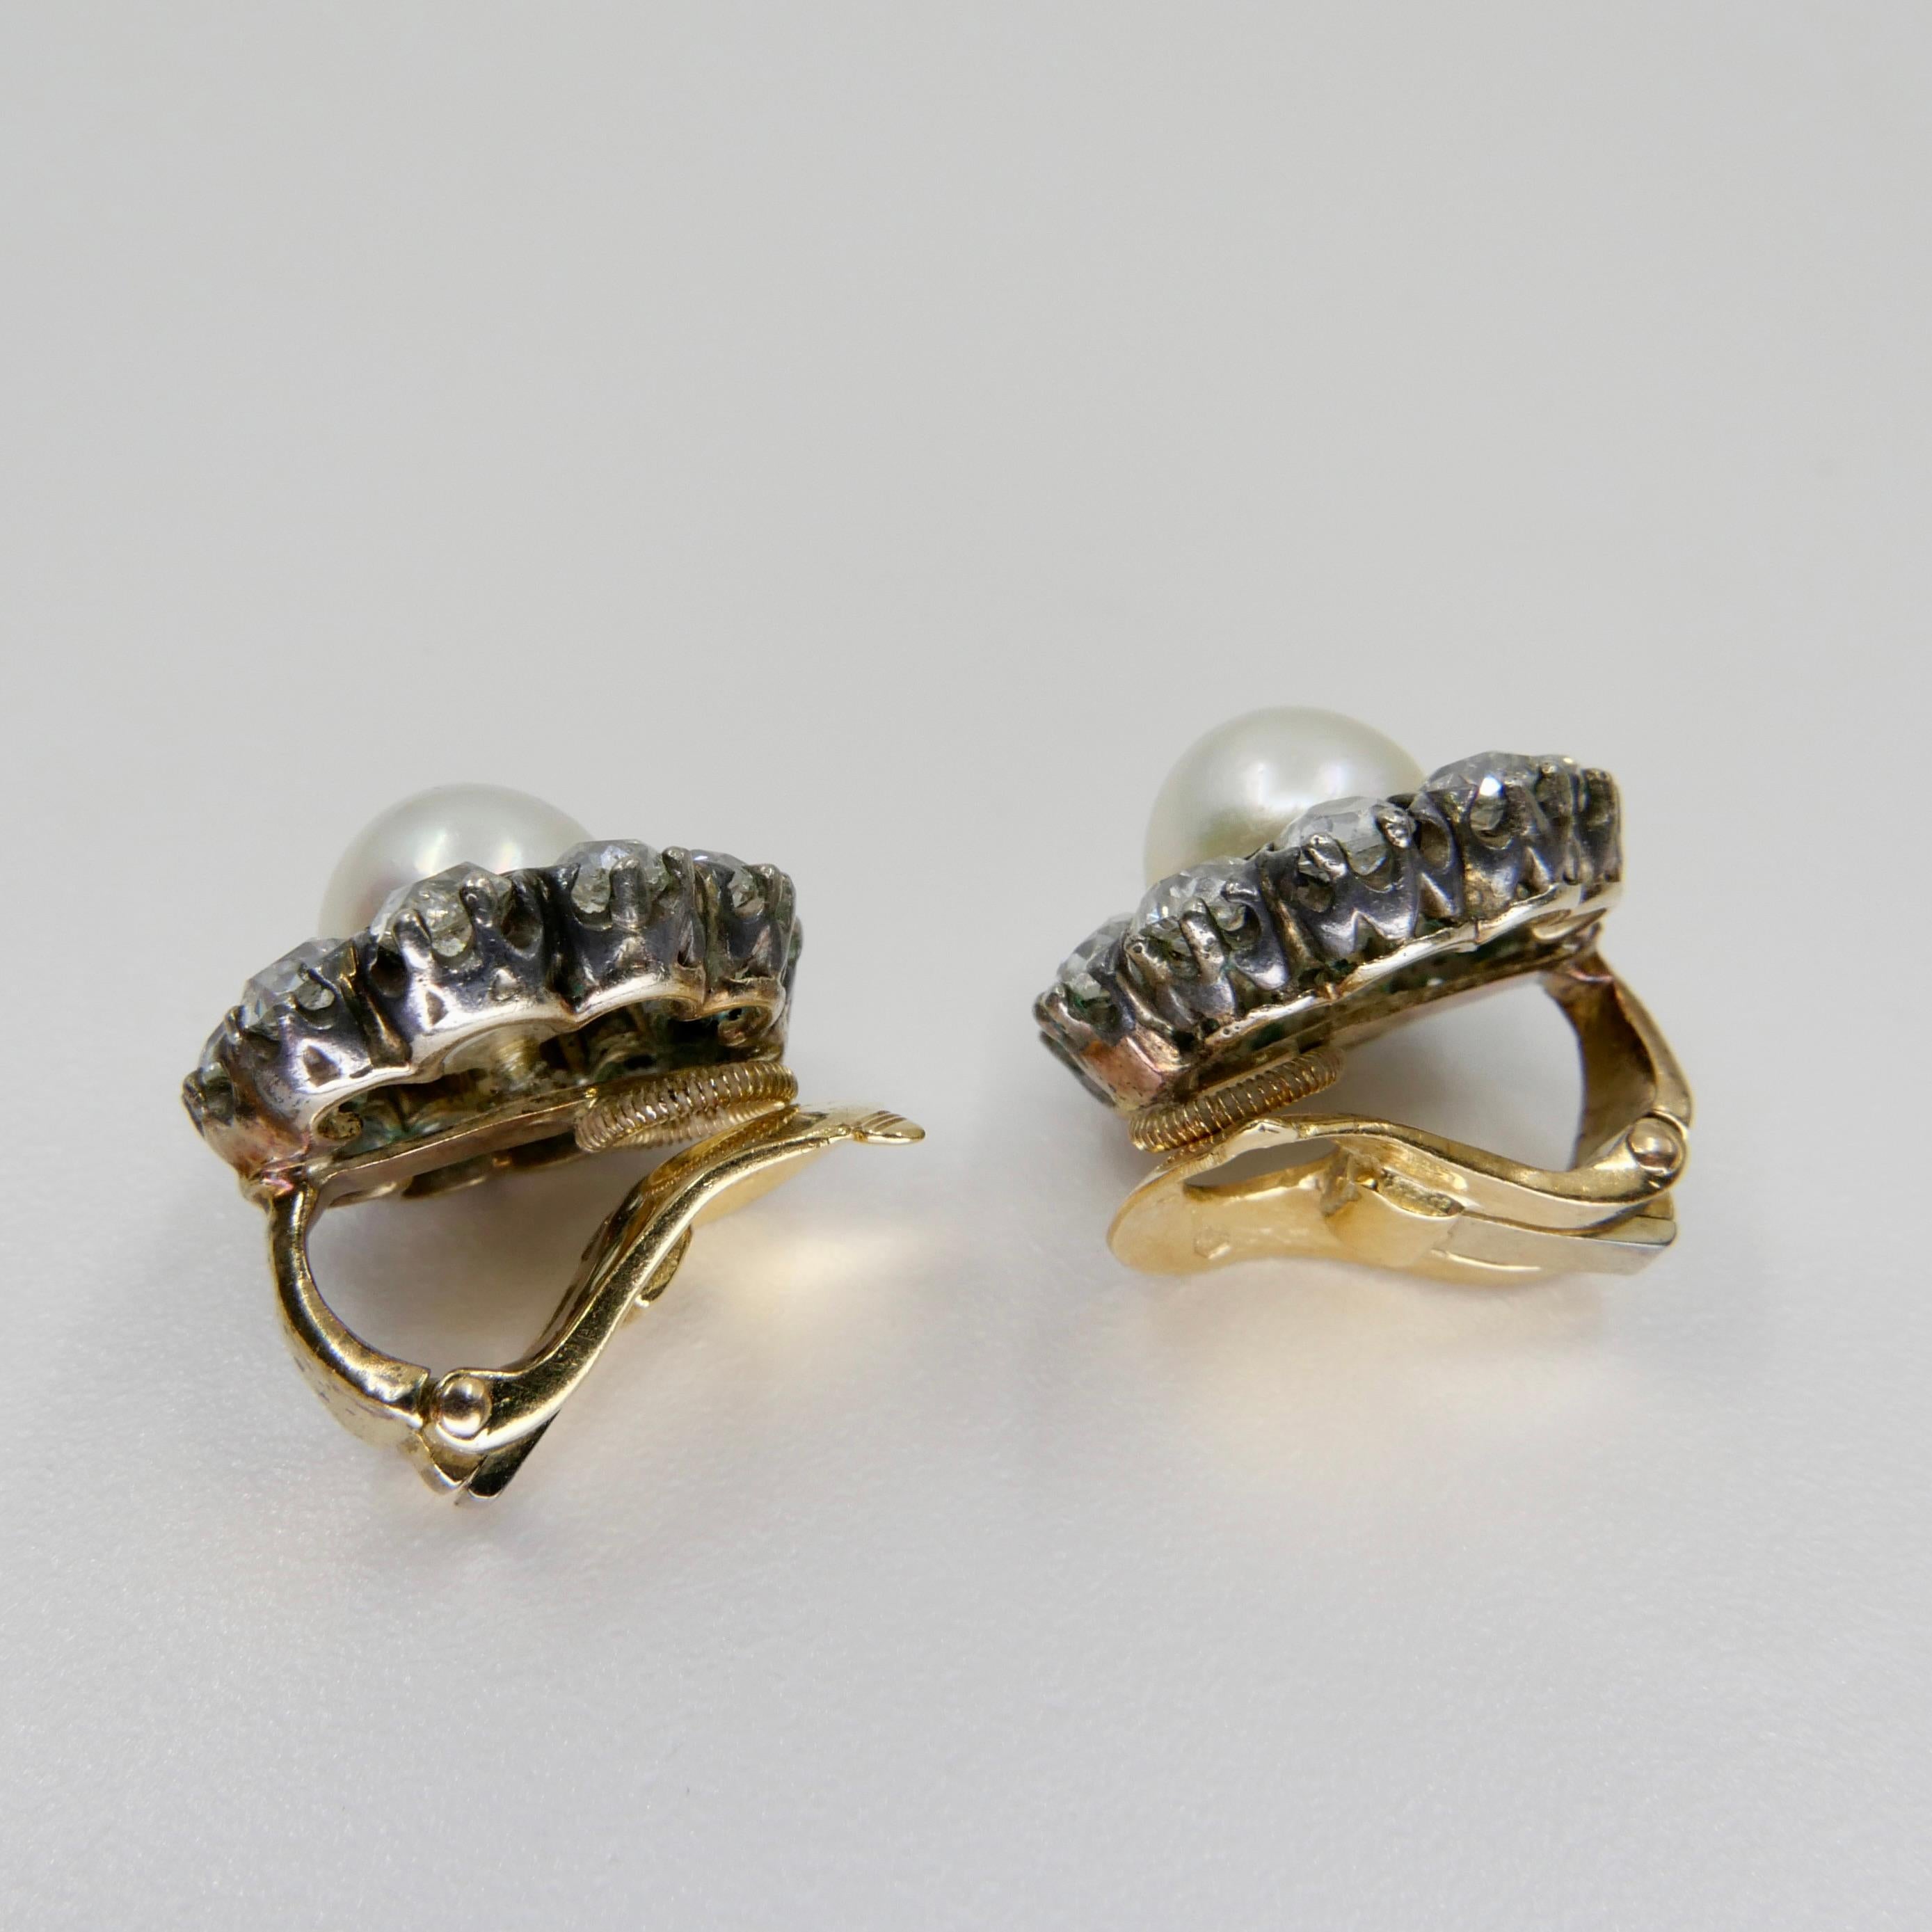 Women's Antique Natural Pearl & Old Cut Diamond Earrings. French Assay & Maker Mark.